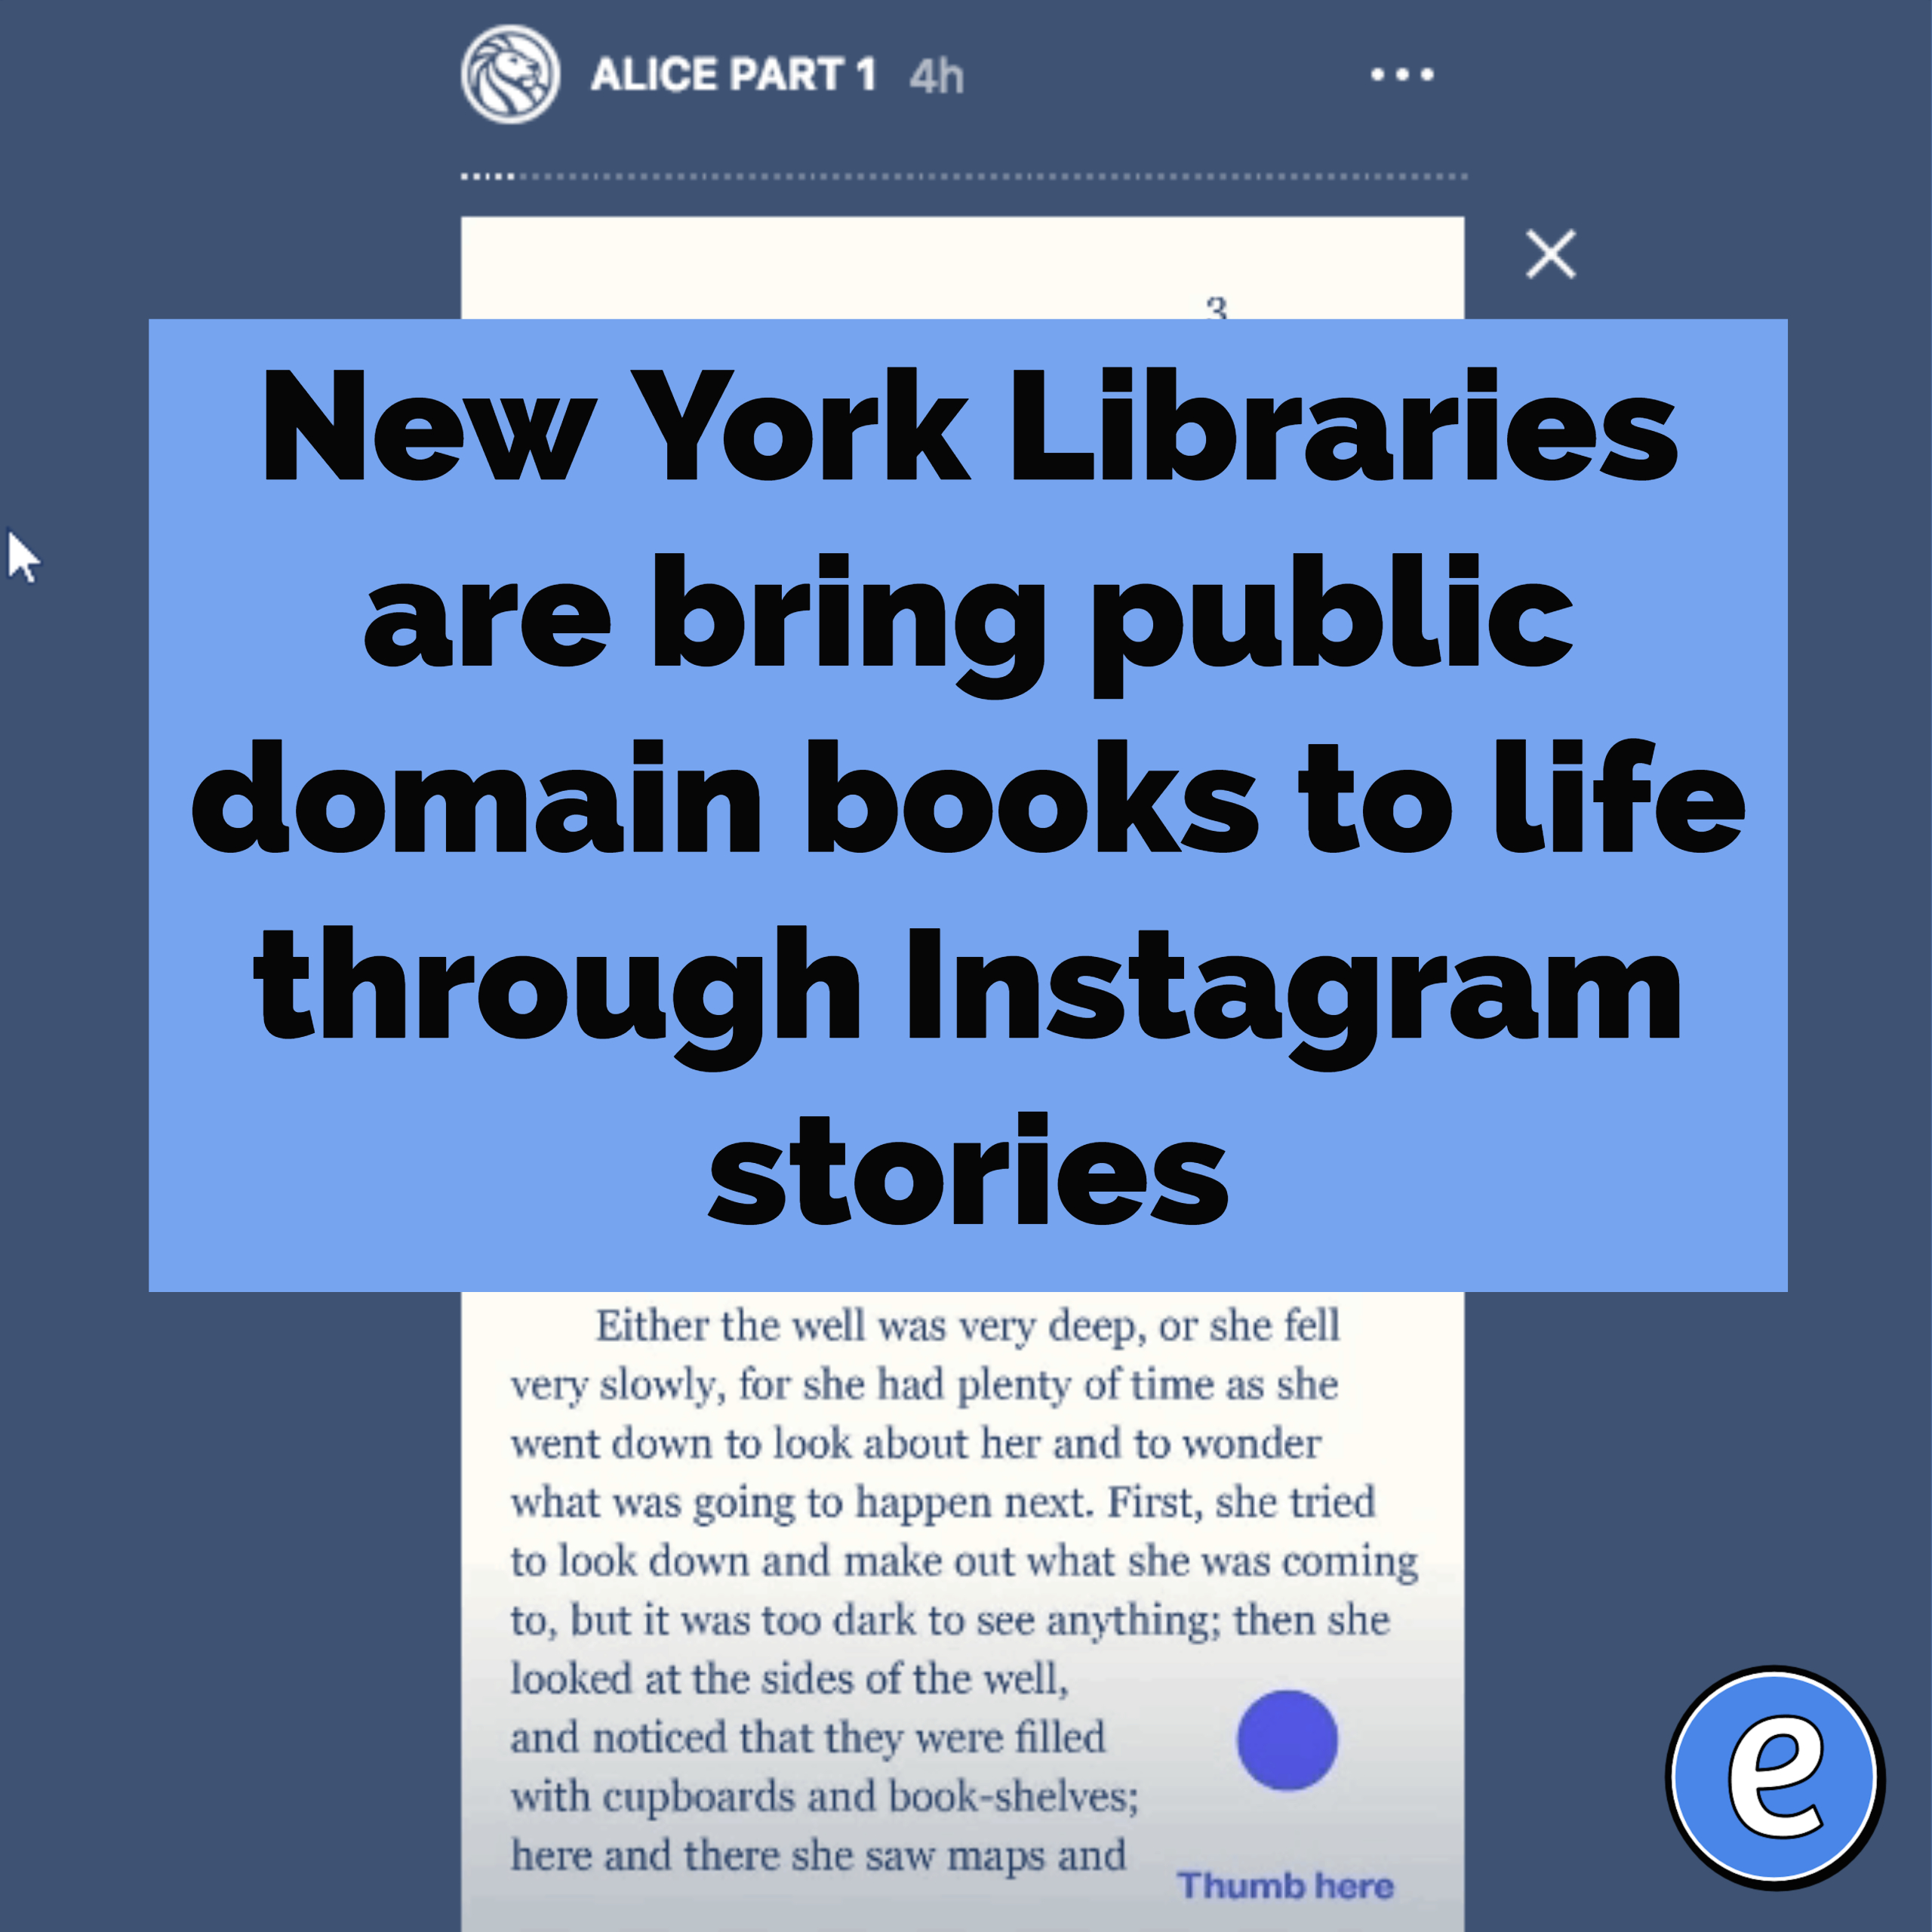 New York Libraries are bring public domain books to life through Instagram stories